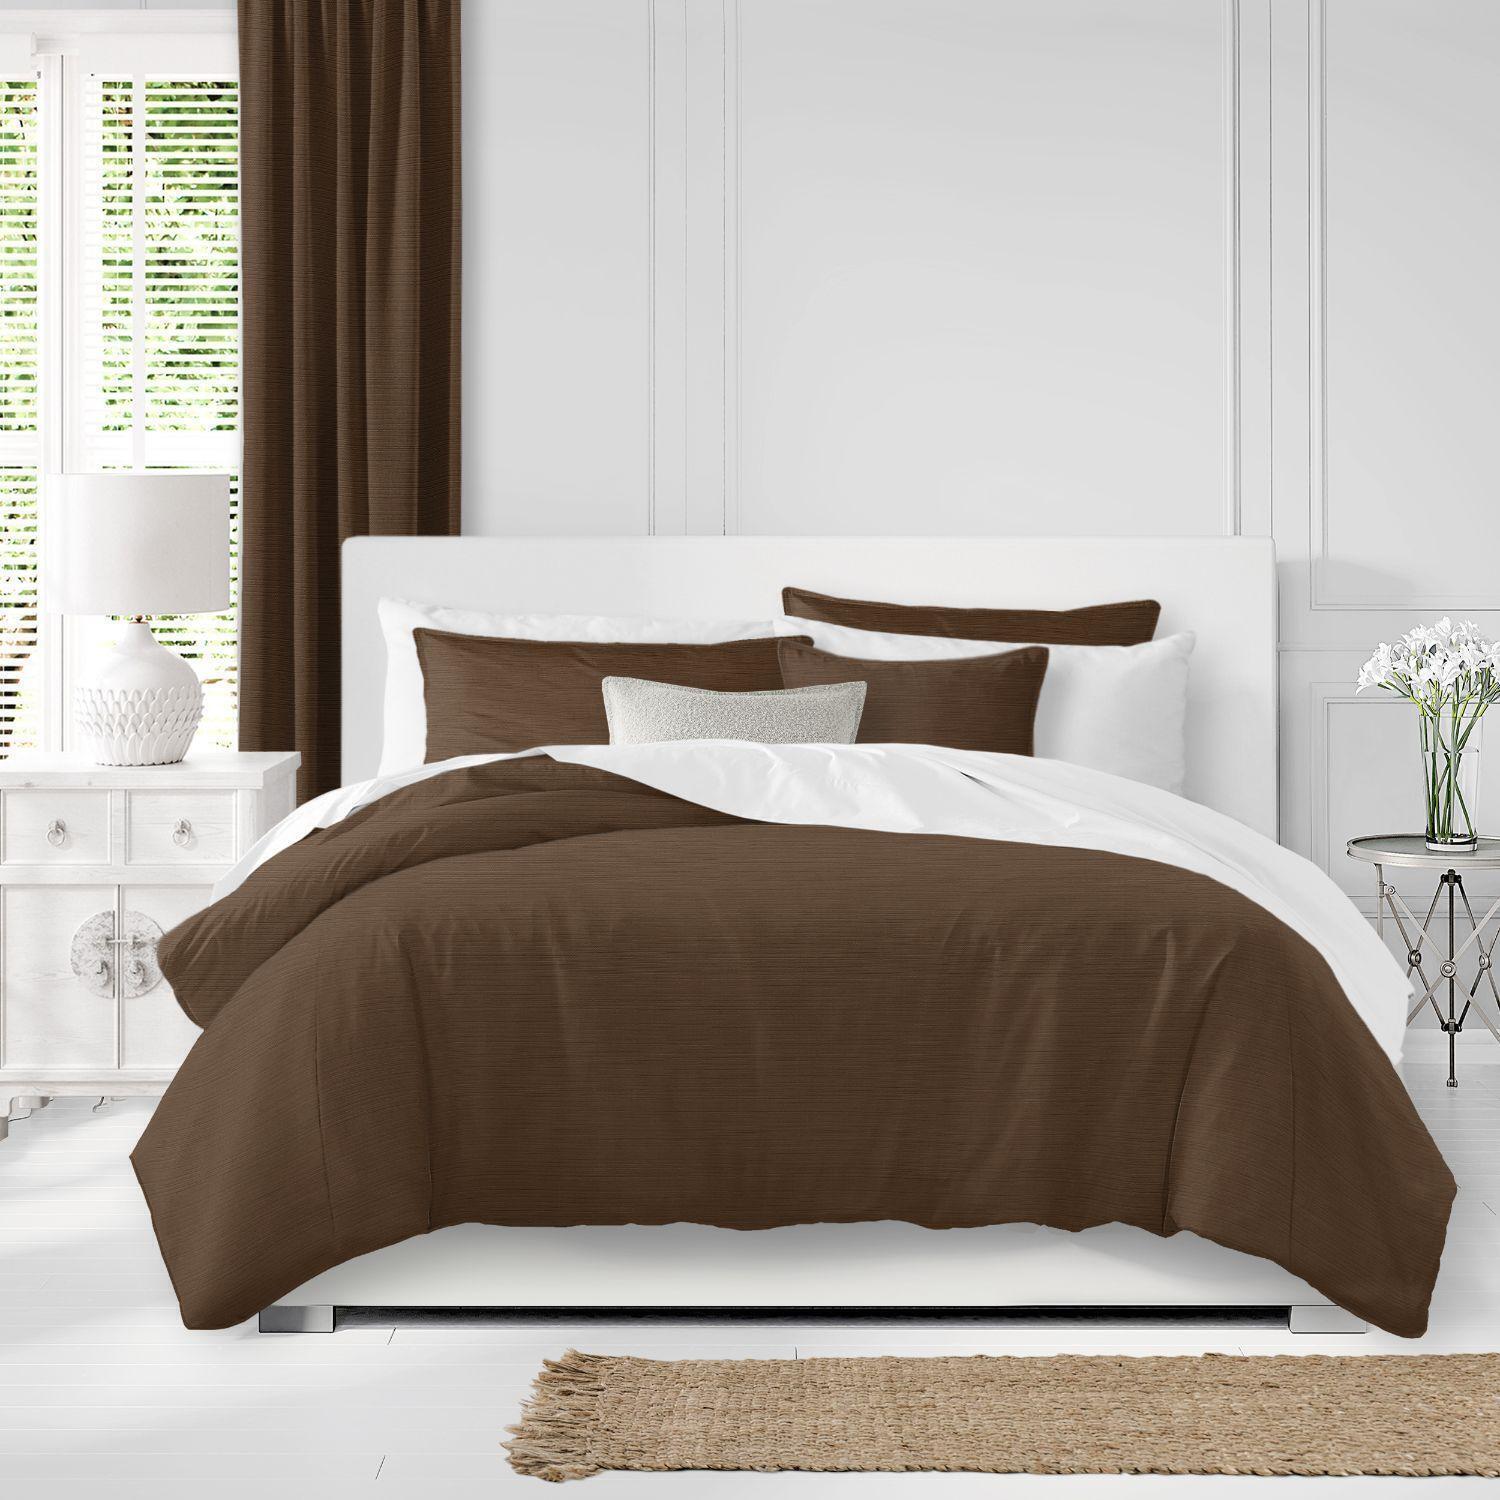 Set of 3 Walnut Brown Solid Comforter with Pillow Shams - King Size